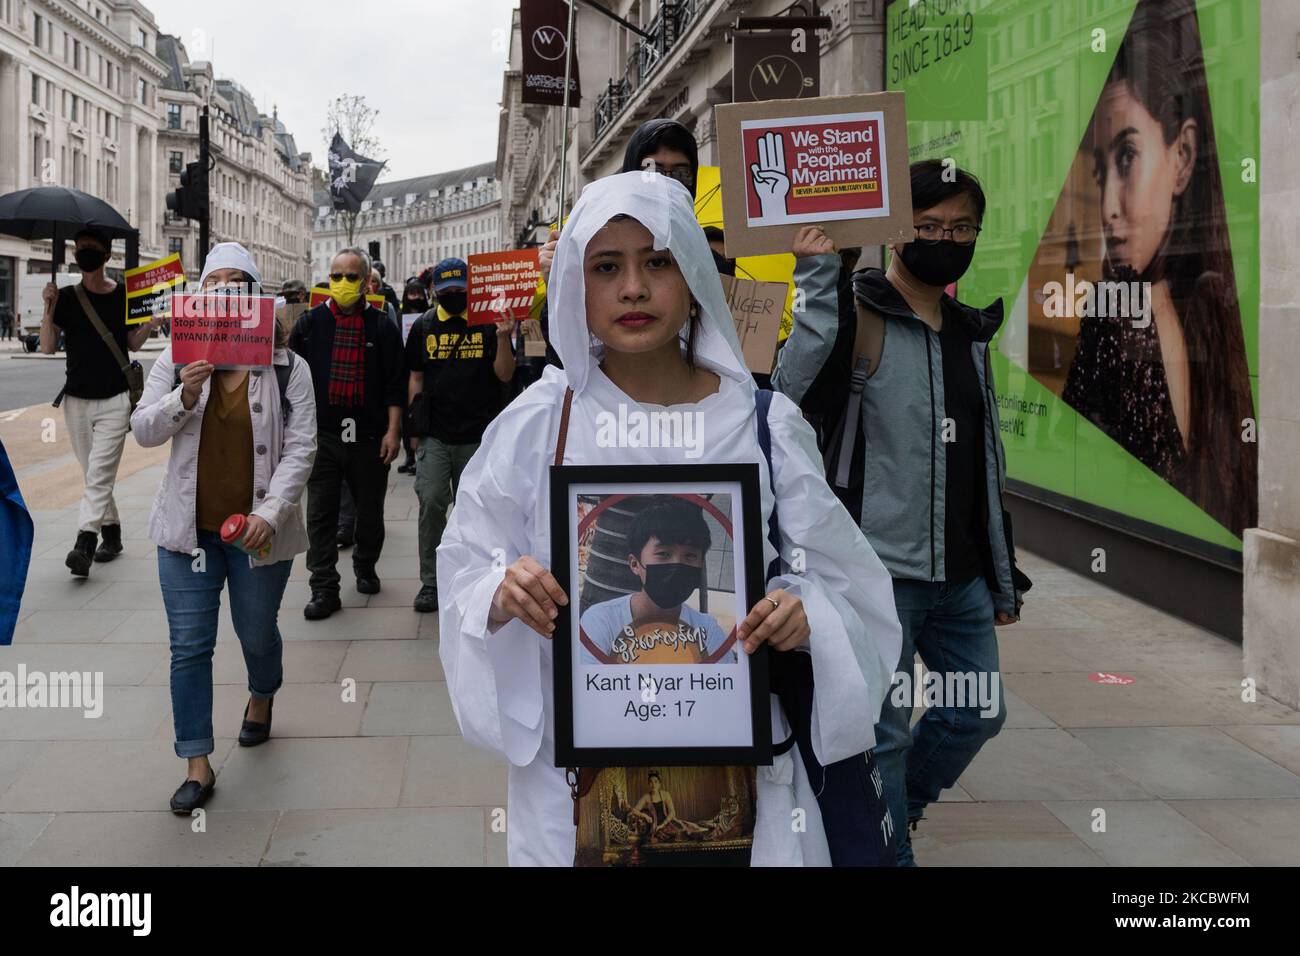 LONDON, UNITED KINGDOM - MARCH 31, 2021: Demonstrator holds a picture of a killed civilian during a march through central London to the Chinese Embassy in a protest against the military coup and killing of civilians during pro-democracy protests in Myanmar, on 31 March, 2021 in London, England. Since the military coup on 1 February, more than 520 people, including children, have been killed by security forces, in a crackdown on protesters demanding the reinstatement of the democratically elected civilian government and release of imprisoned leaders Aung San Suu Kyi and U Win Myint. (Photo by W Stock Photo